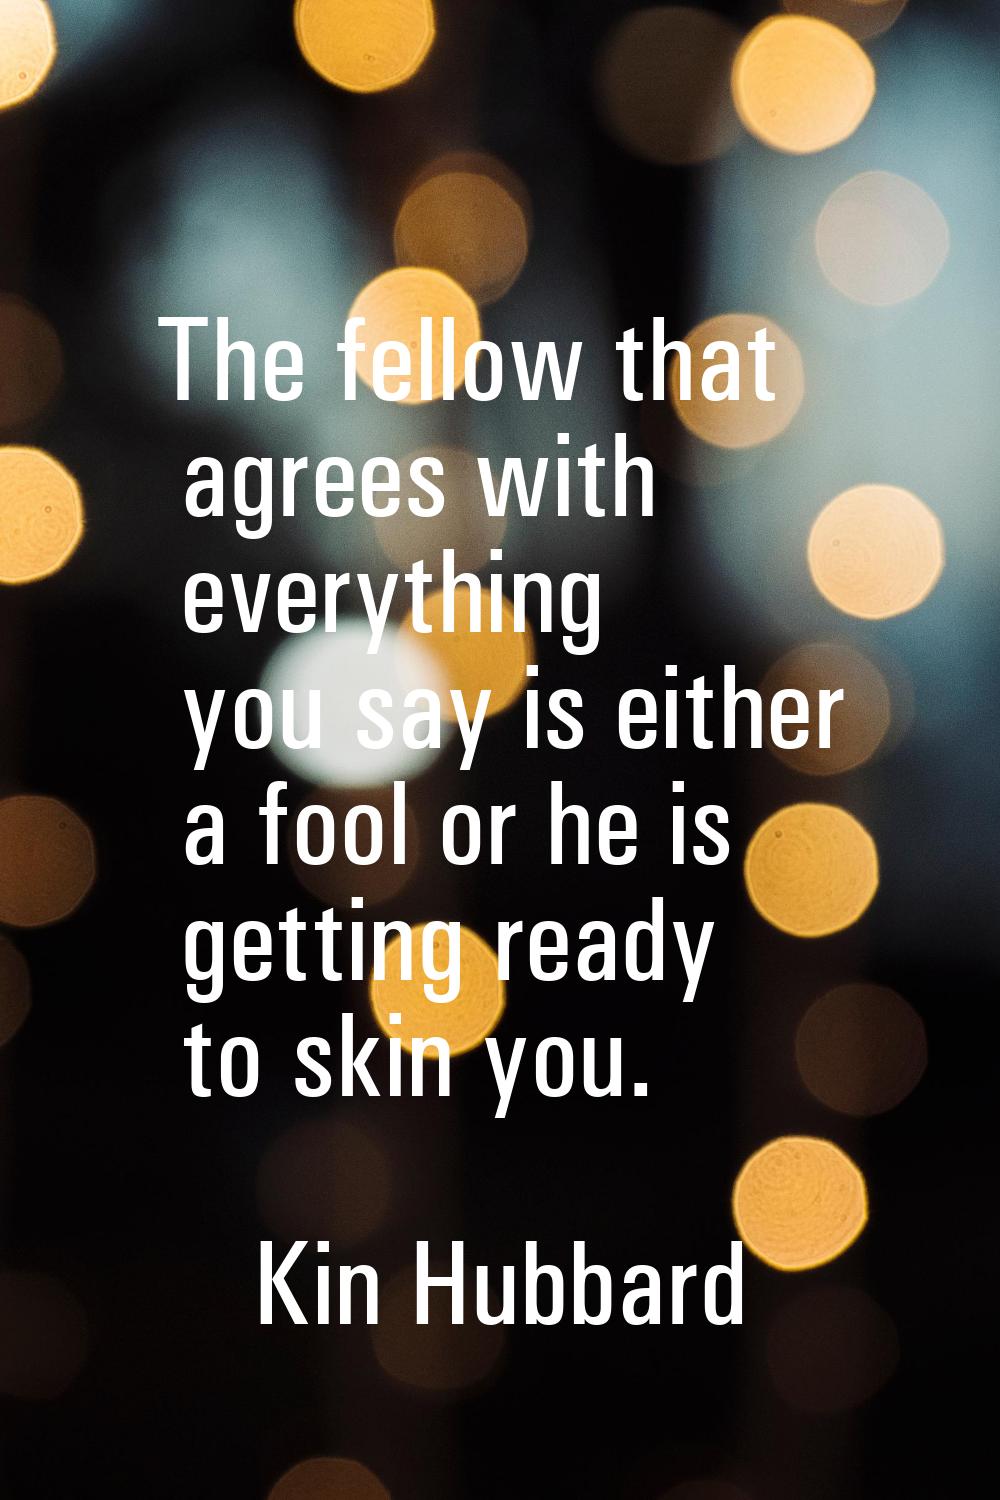 The fellow that agrees with everything you say is either a fool or he is getting ready to skin you.